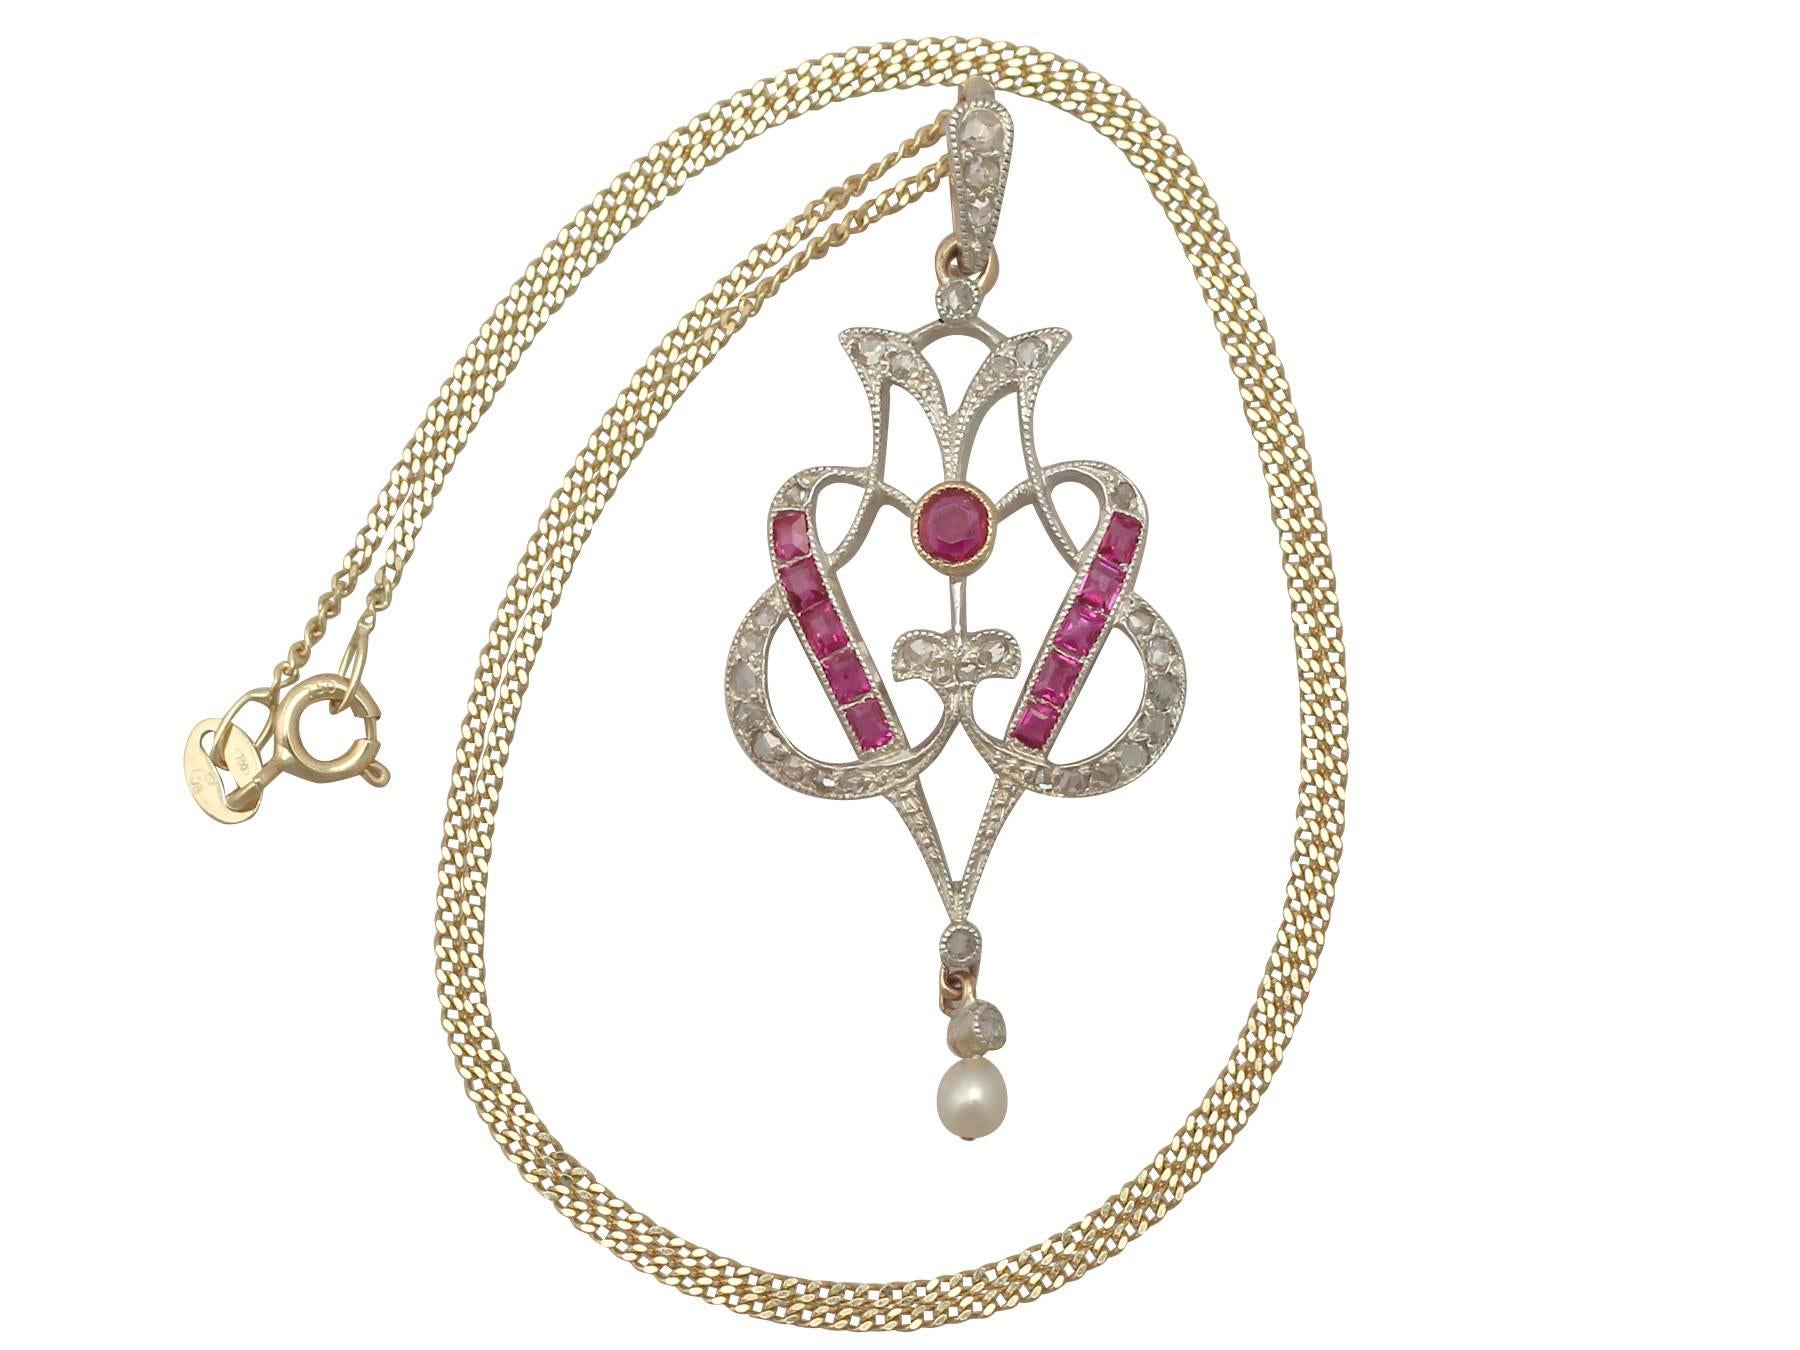 A fine and impressive antique Victorian 0.60 carat ruby and 0.29 carat diamond, seed pearl and 14 karat yellow gold, silver set pendant; part of our diverse antique jewelry and estate jewelry collections.

This fine and impressive diamond and ruby